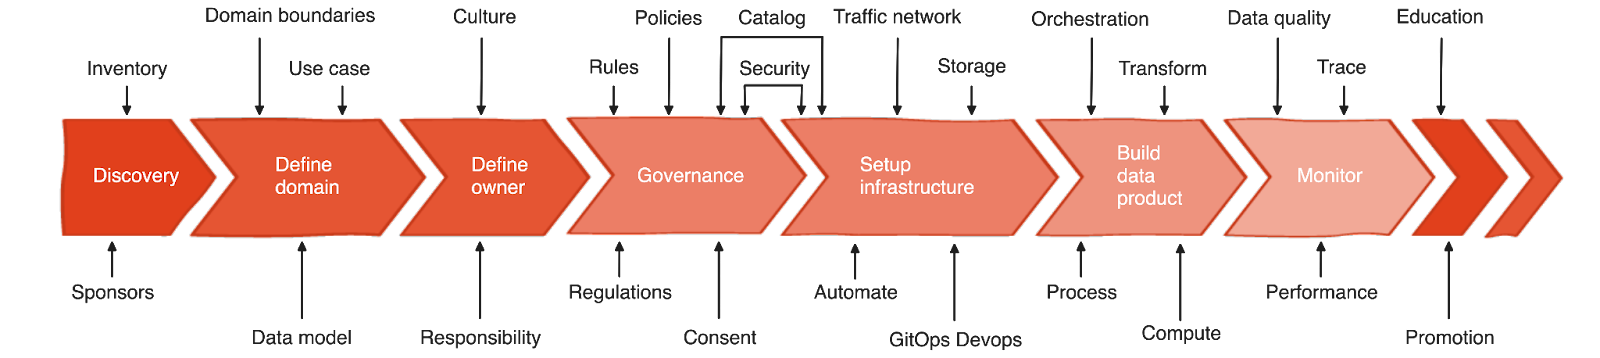 Diagram showing strategic process and practice for building data data platforms 